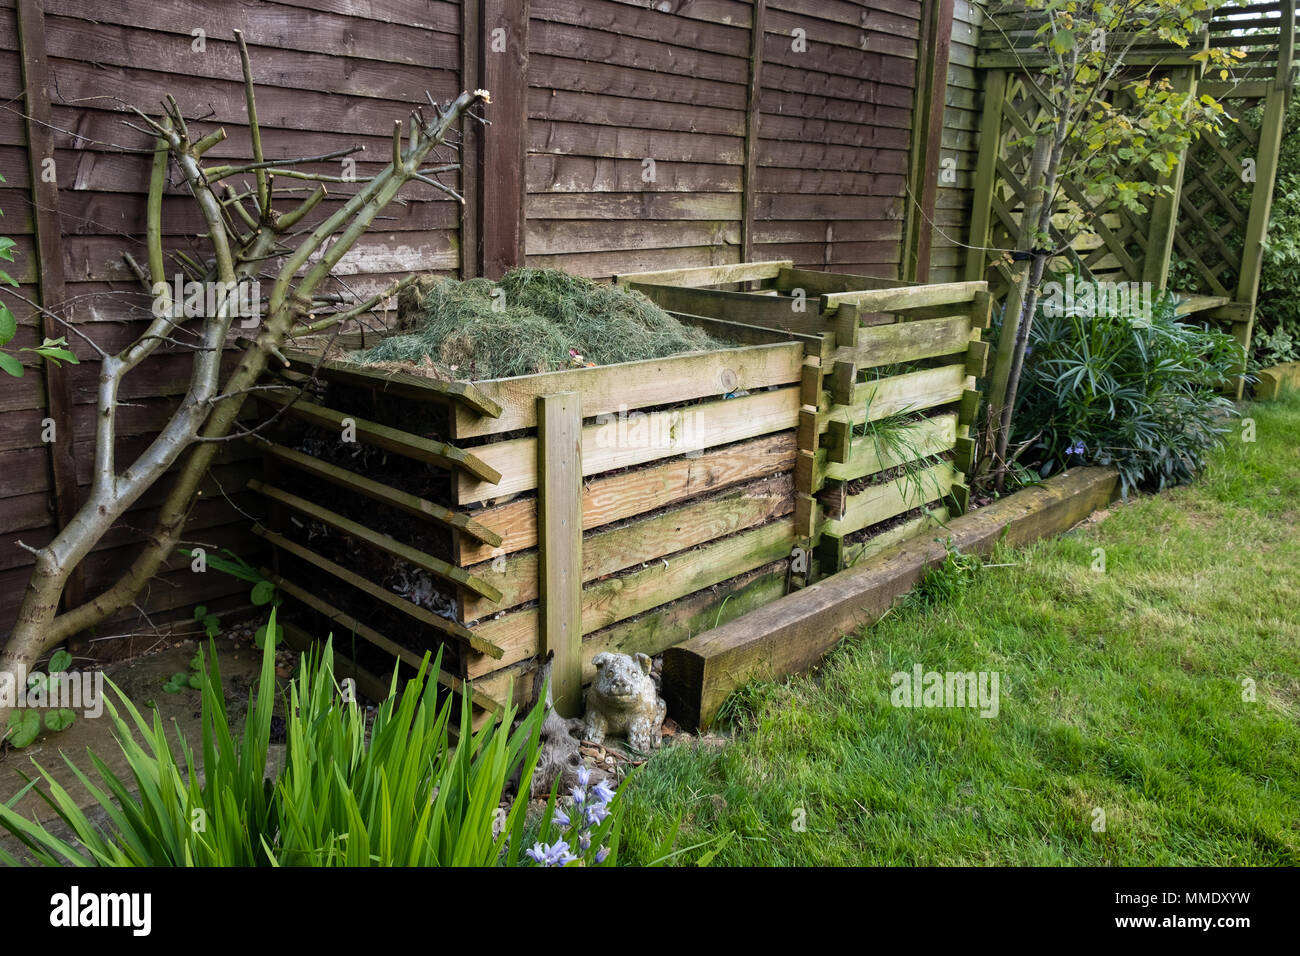 Two garden compost heaps, one full of grass cuttings. Stock Photo